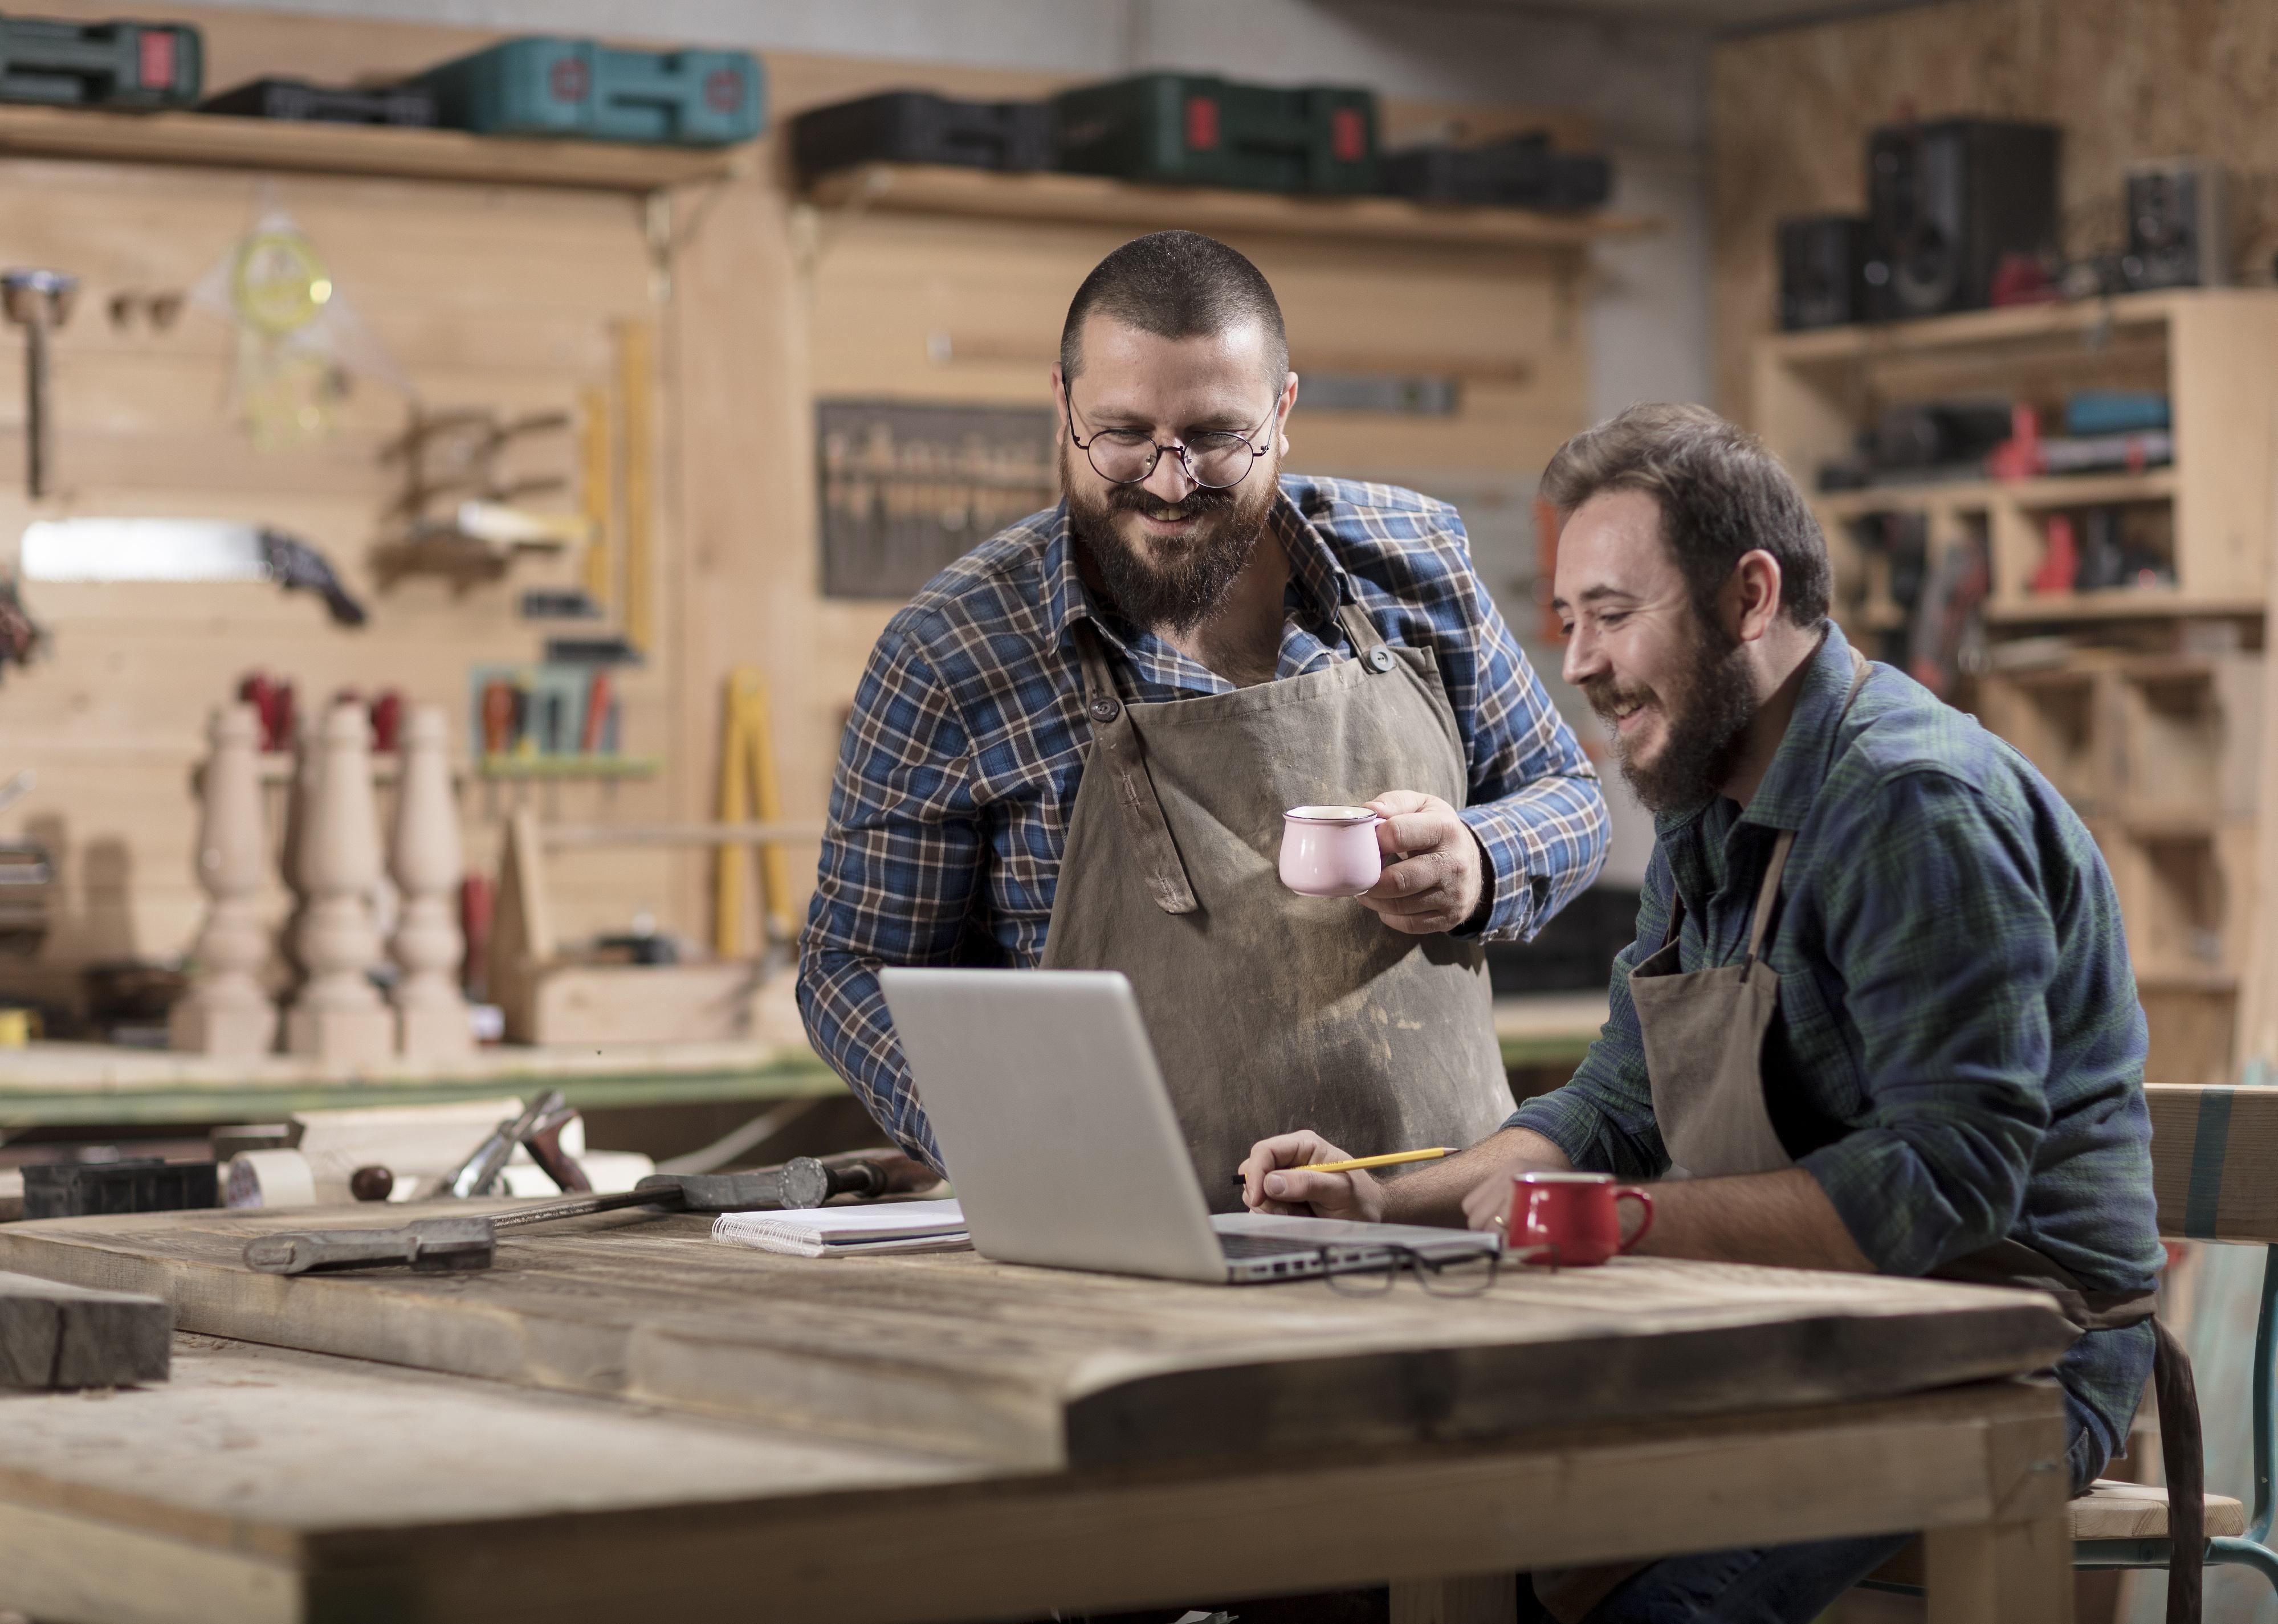 Two wood designers working with laptop in workshop holding small teacups.